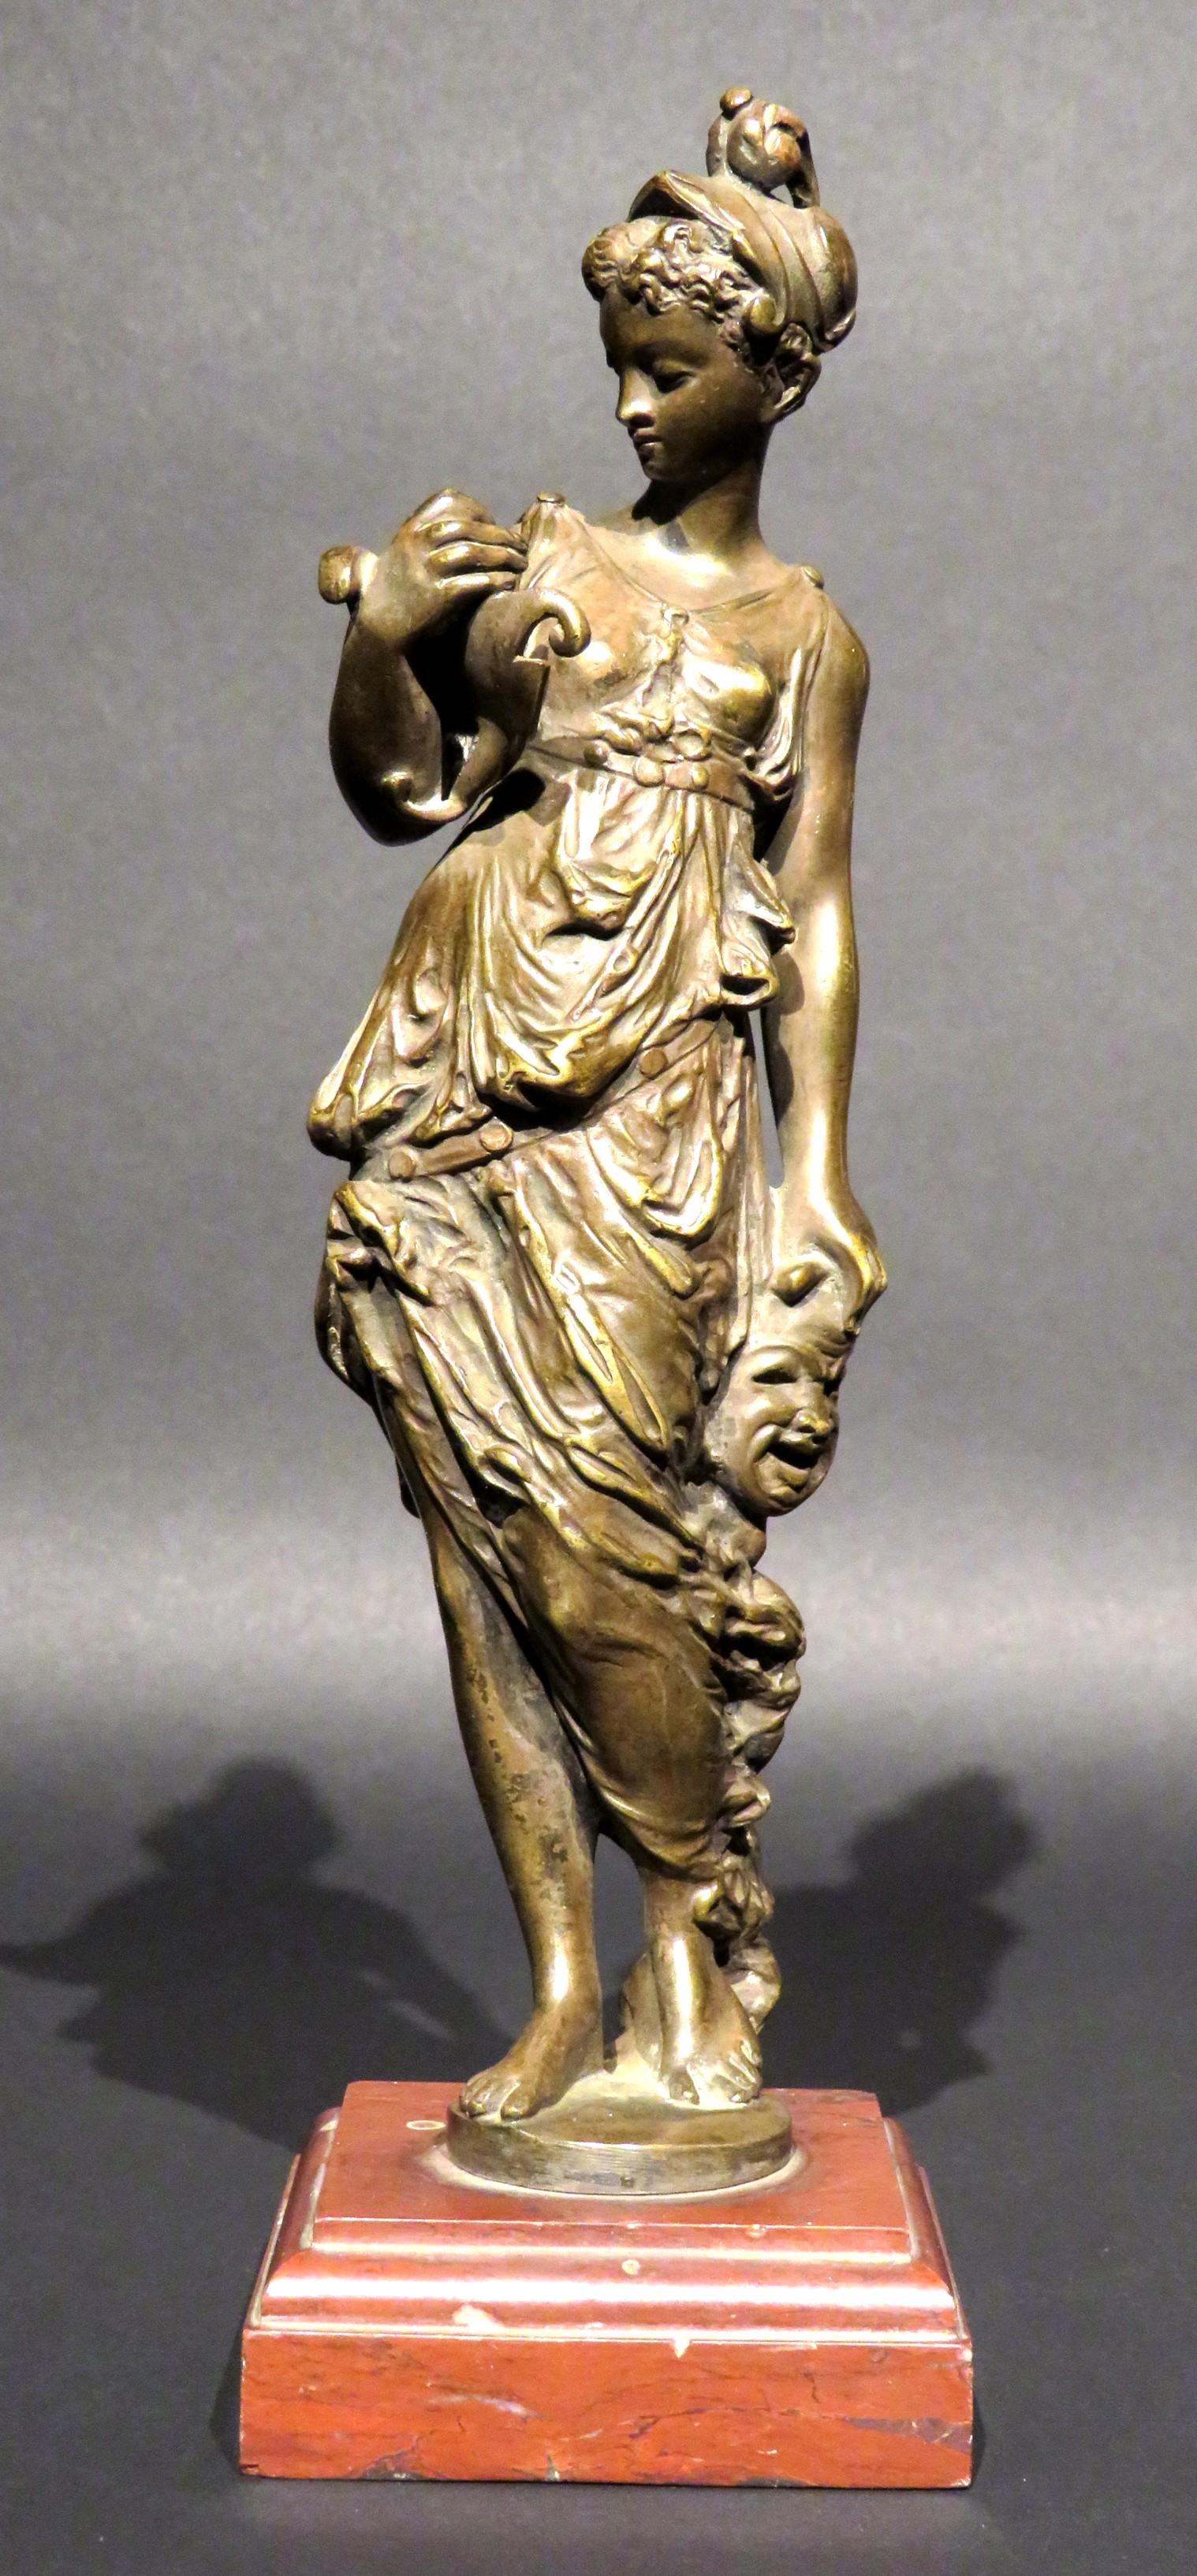 The finely cast & patinated bronze figure of Thalia, one of the nine Greek Muses and known as The Goddess of Comedy & Idyllic Poetry, shown standing draped in classical attire holding a comedic mask by her side in one hand and a poem in the other,